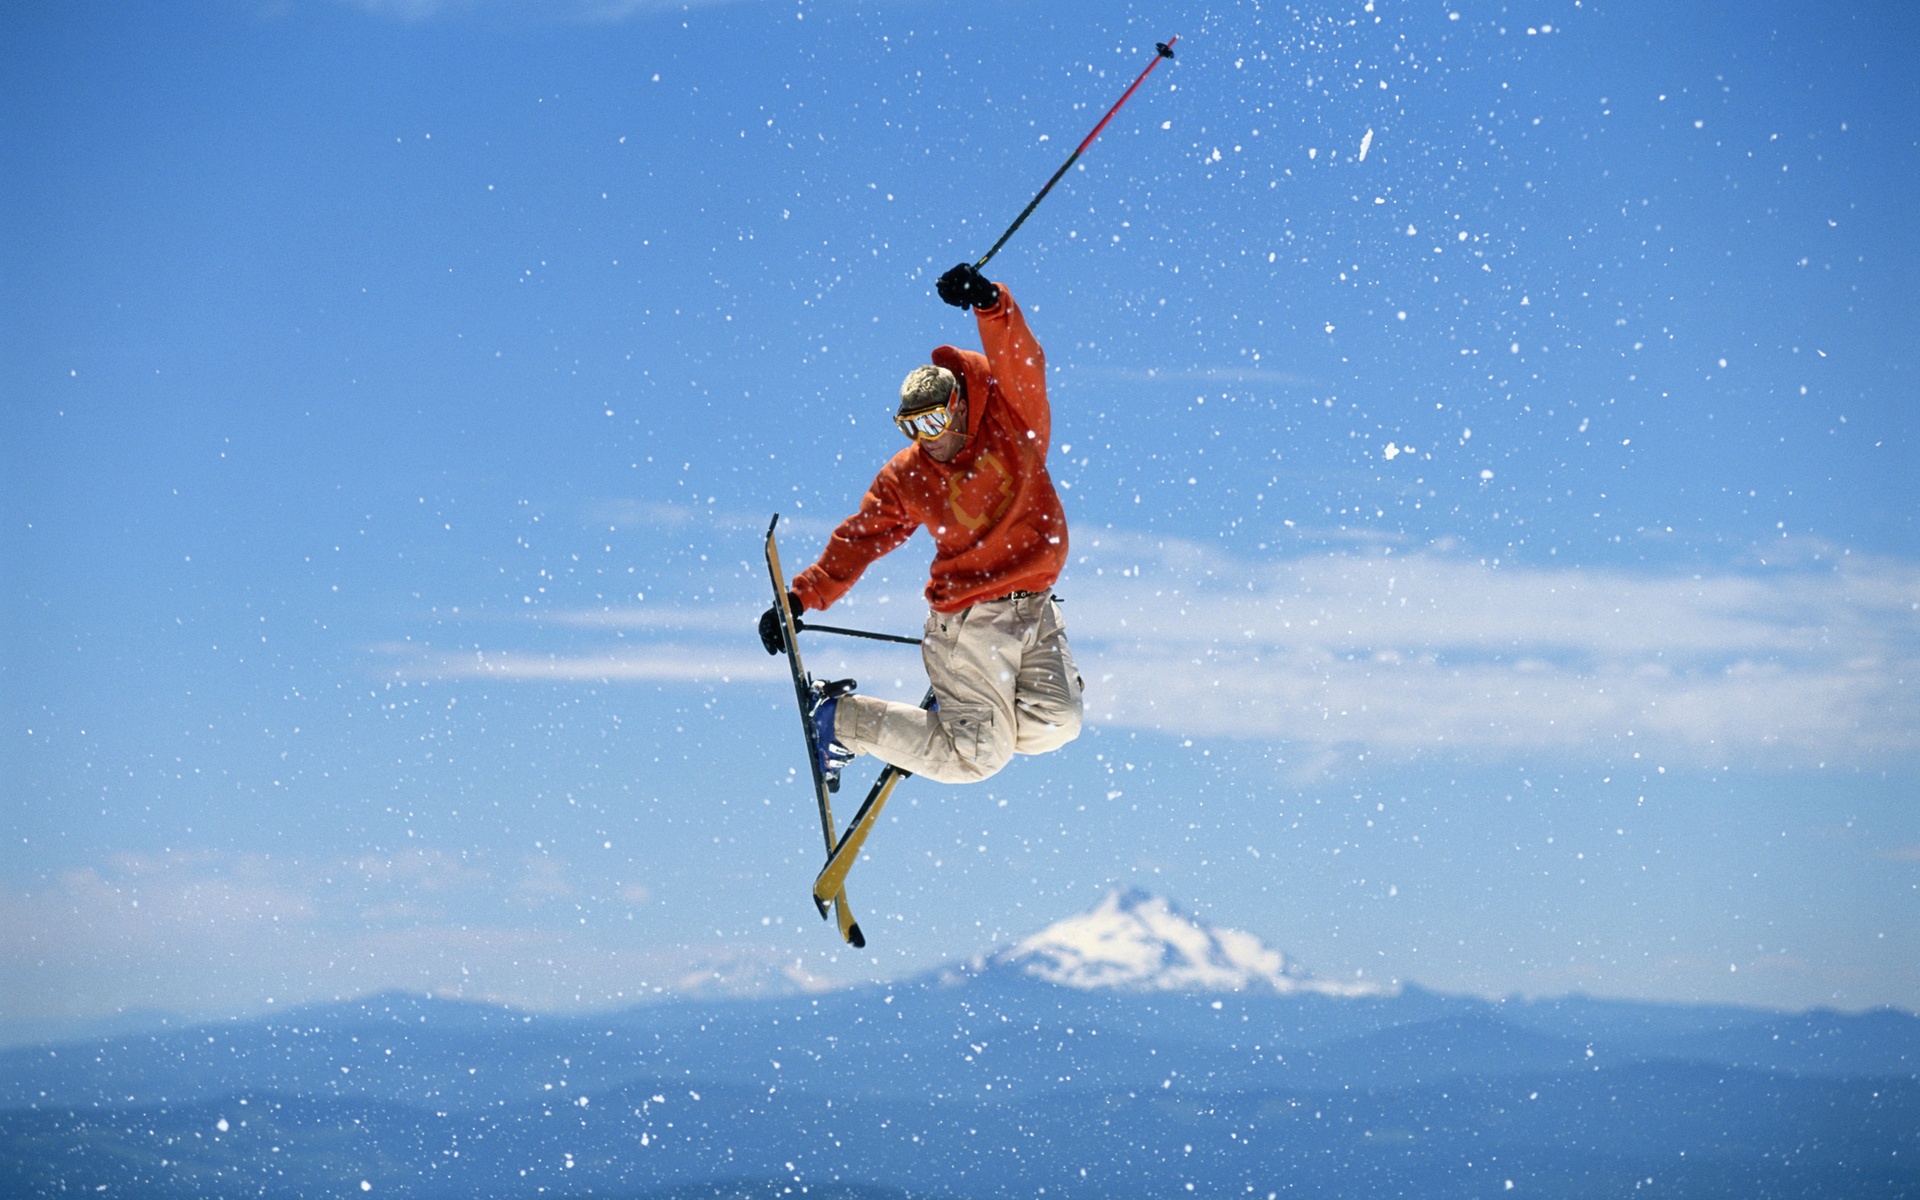 Skiing: Slalom, Freestyle, Powder skiing, Winter activity, Gliding on a snow. 1920x1200 HD Background.